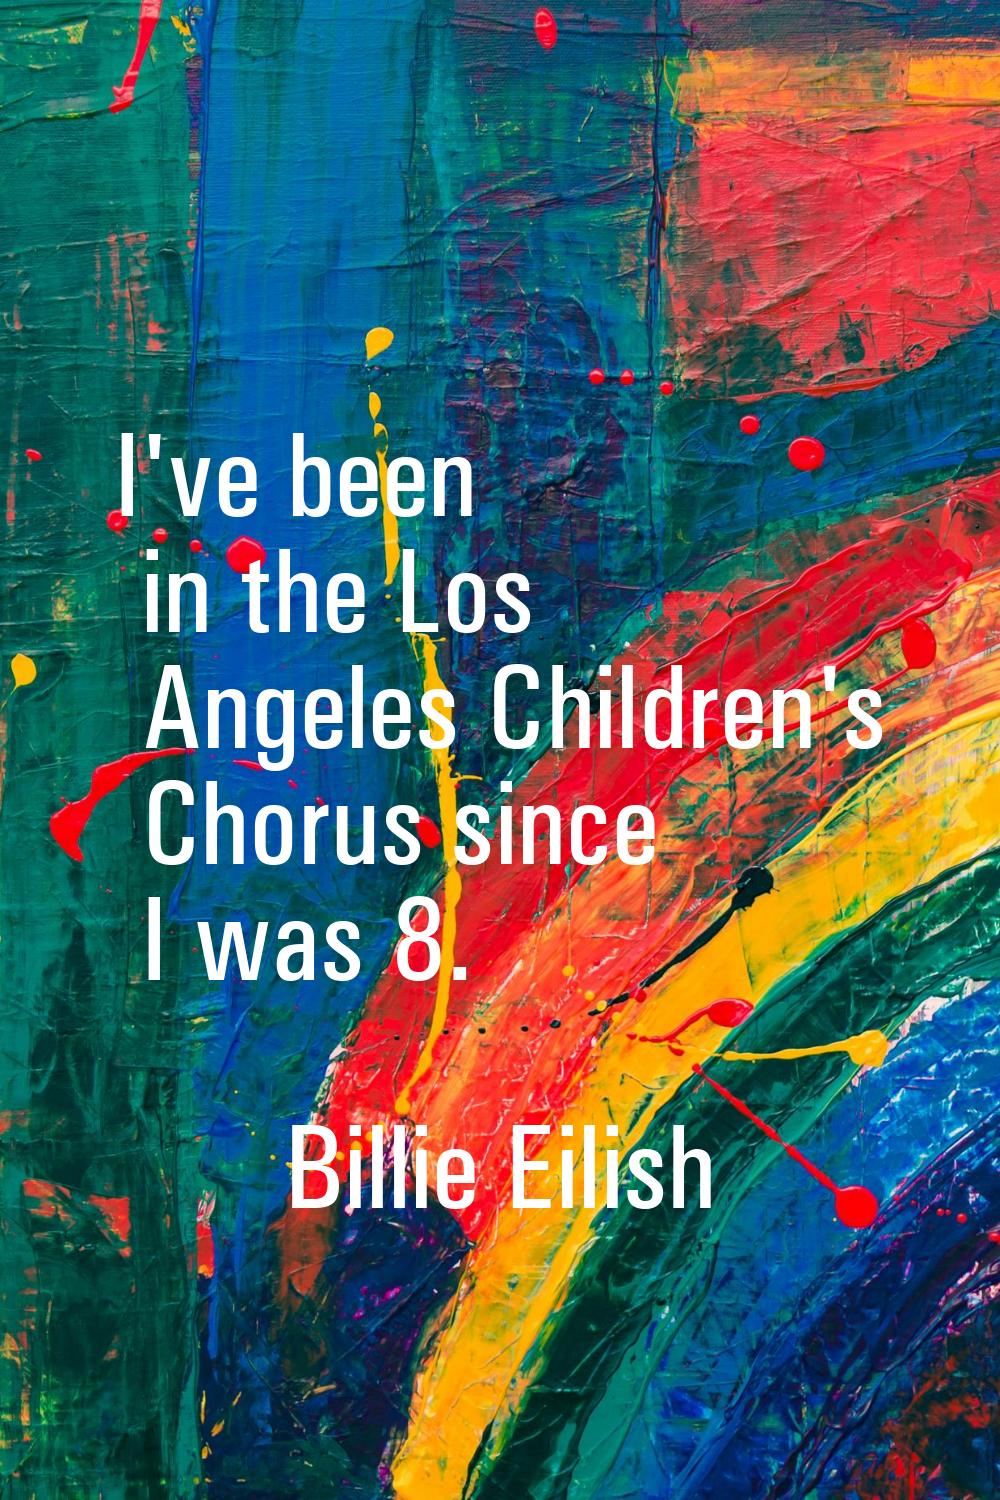 I've been in the Los Angeles Children's Chorus since I was 8.